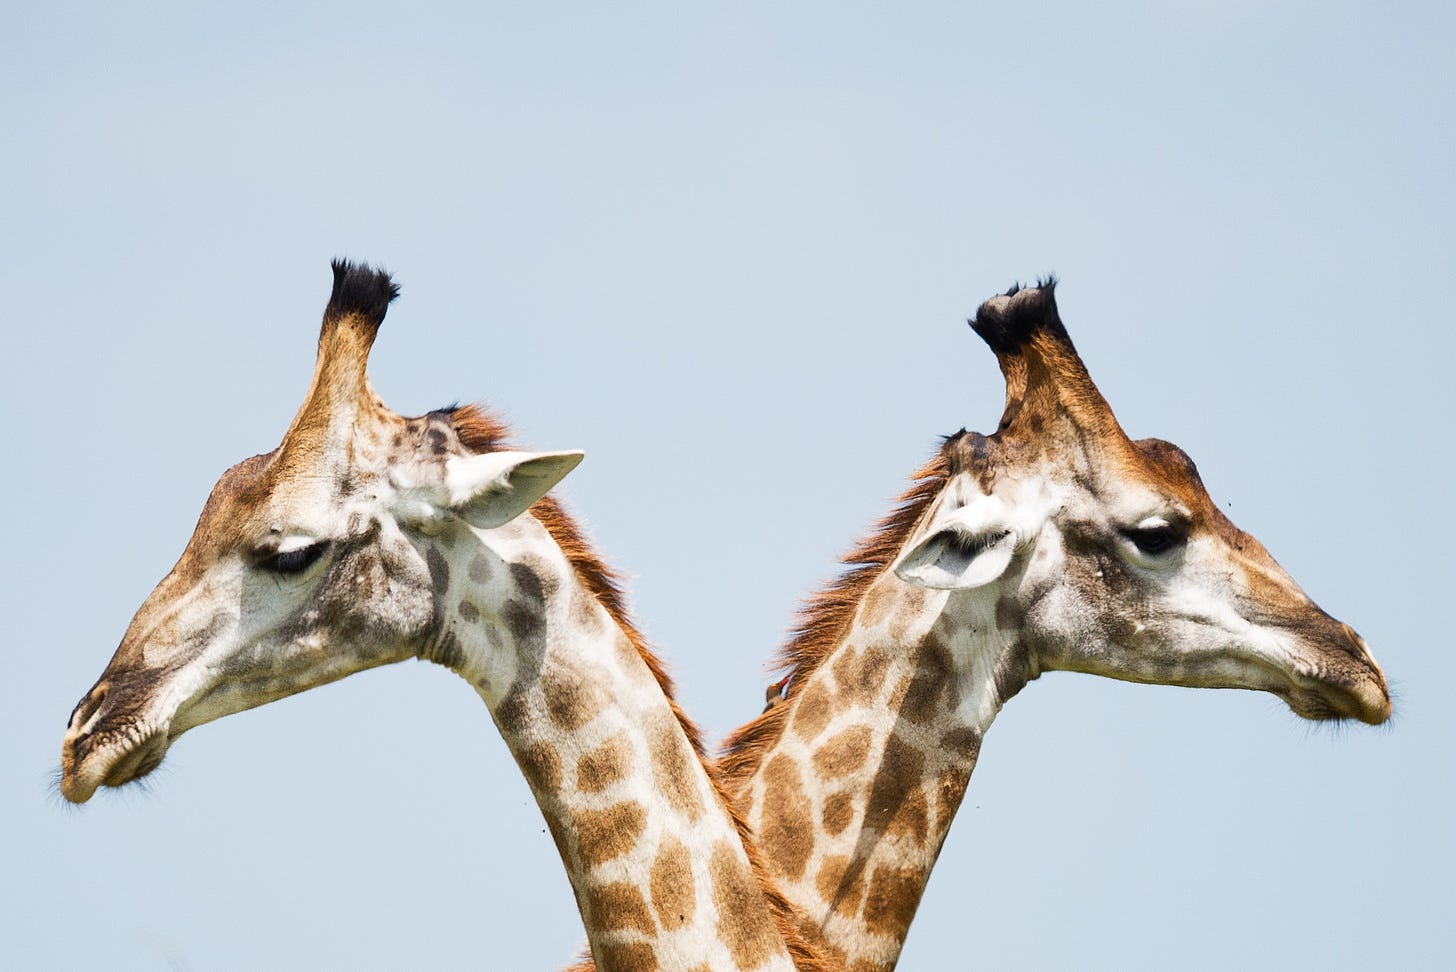 Two giraffes cross their necks, one looking to the left and one looking to the right with a blue sky behind them.